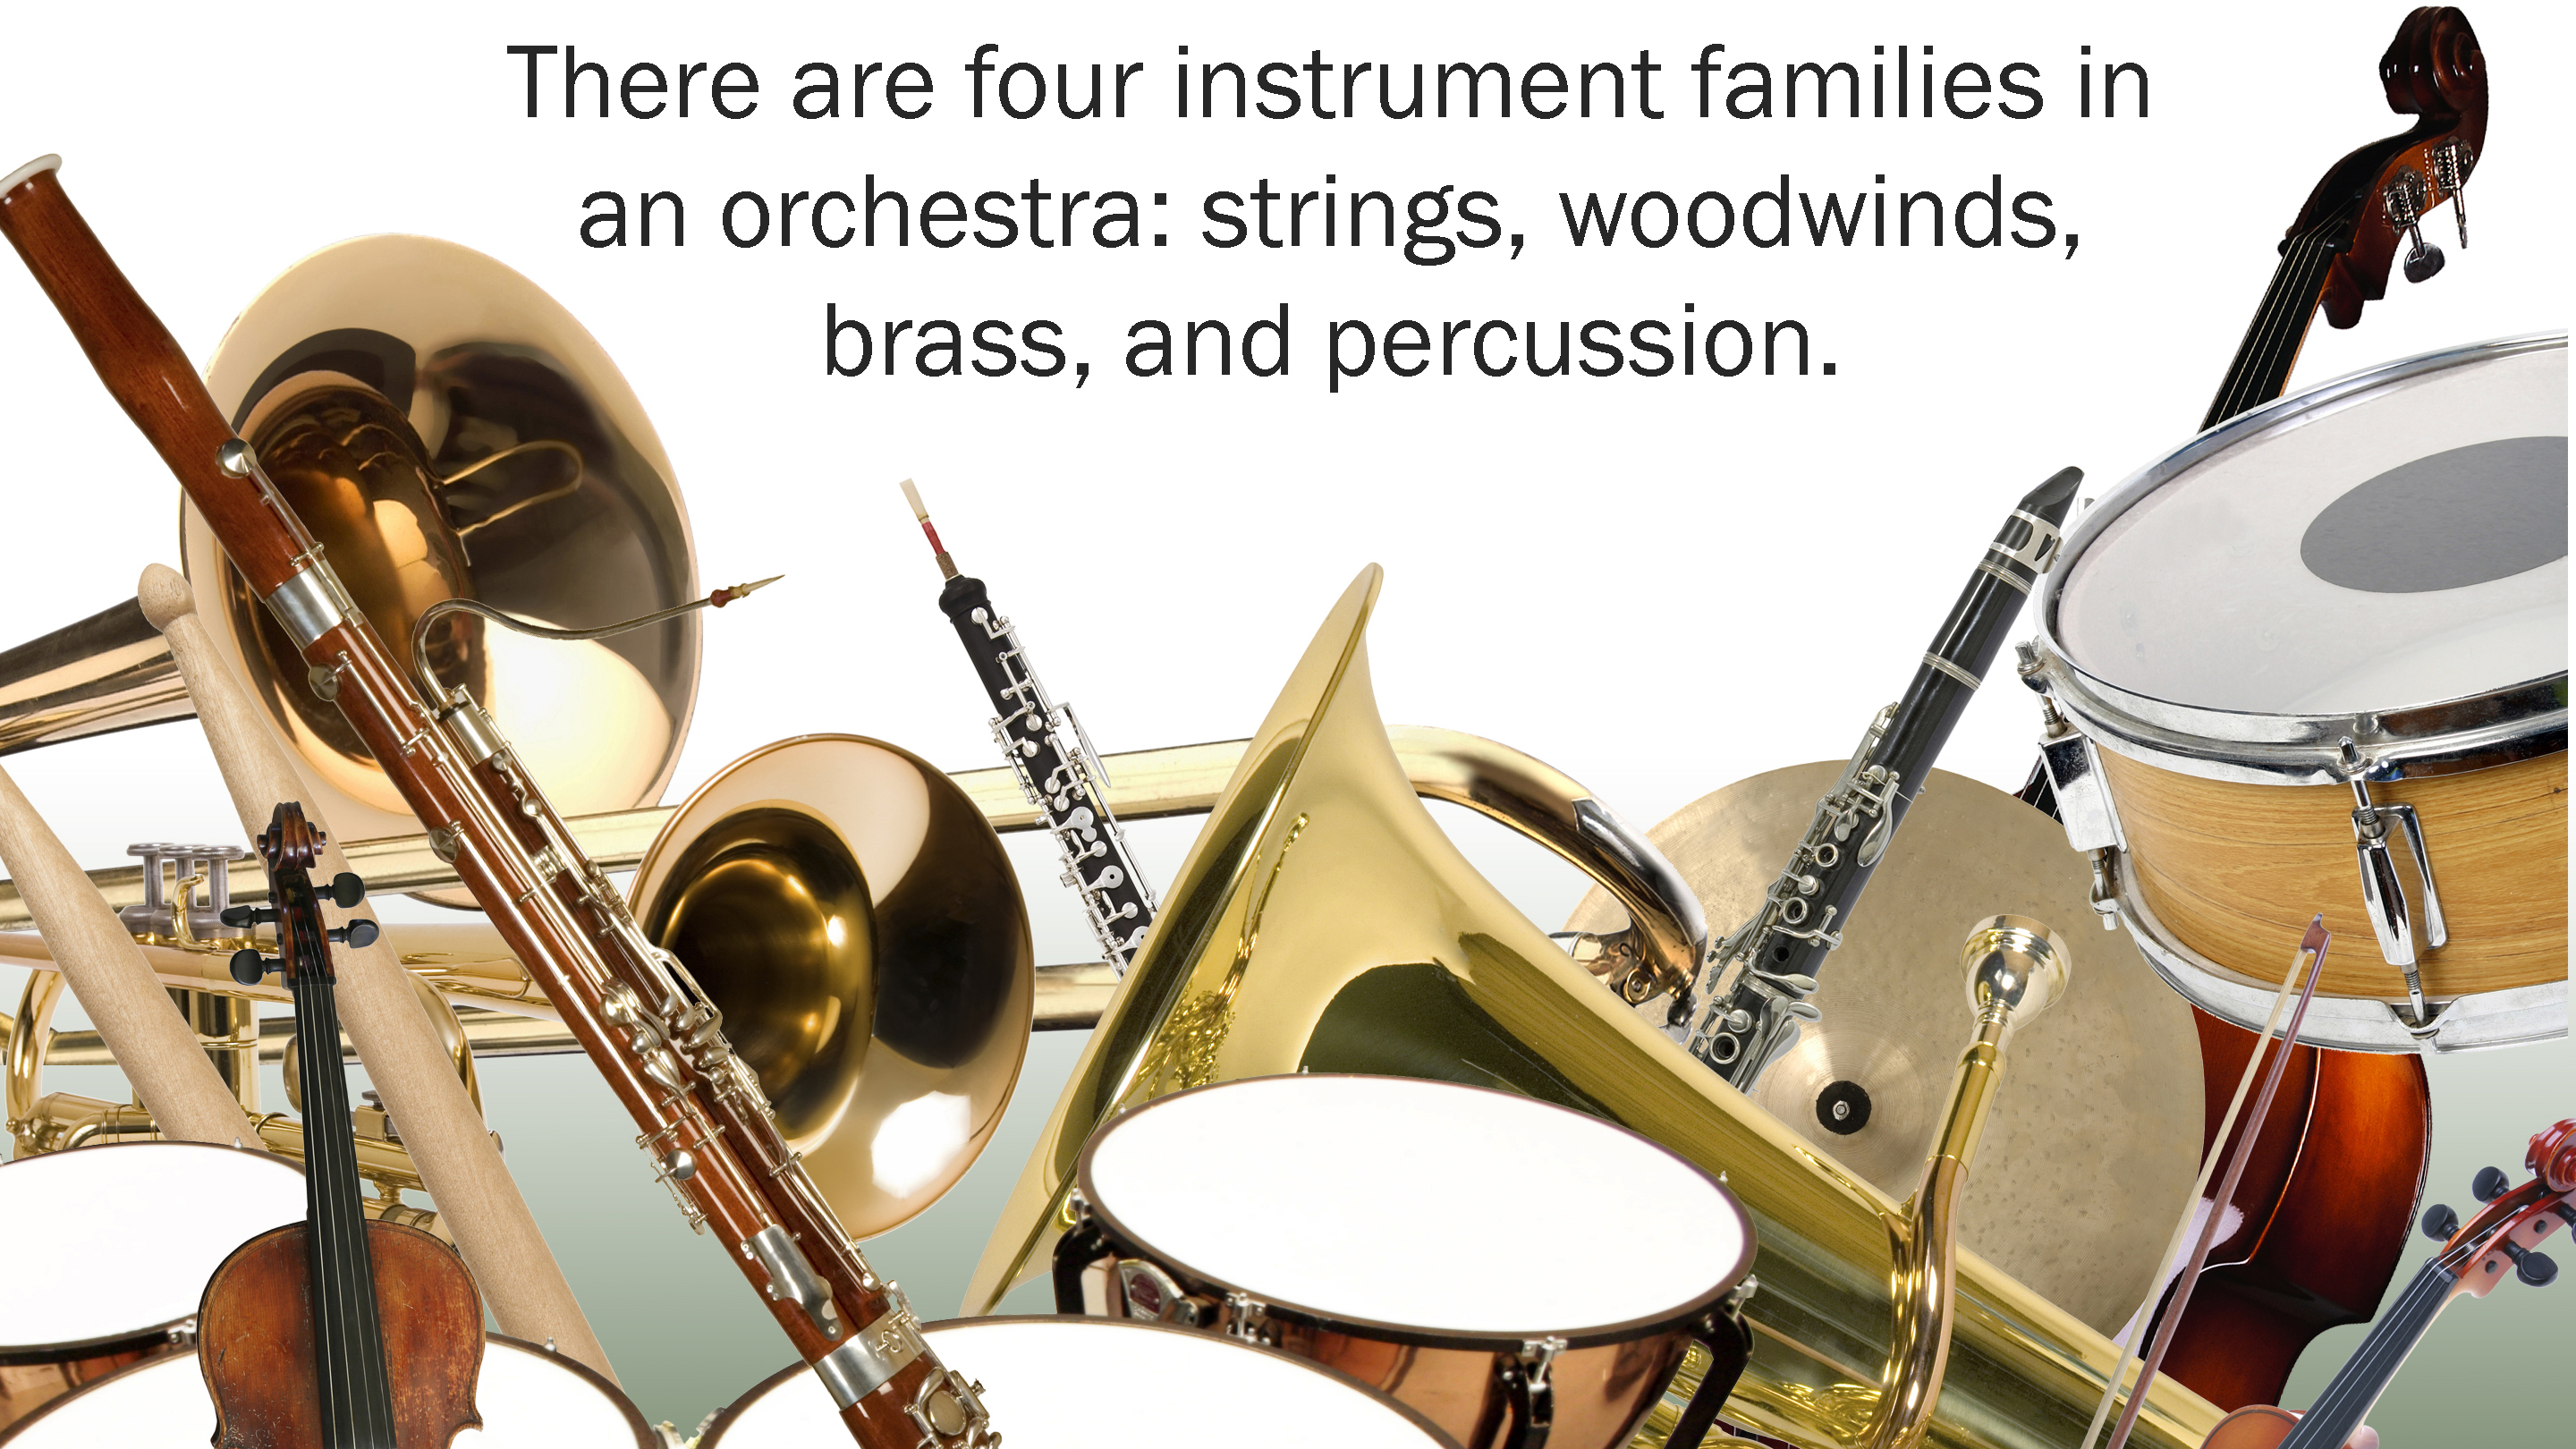 Orchestra Instrument Families: Strings, Woodwinds, Brass, Percussion